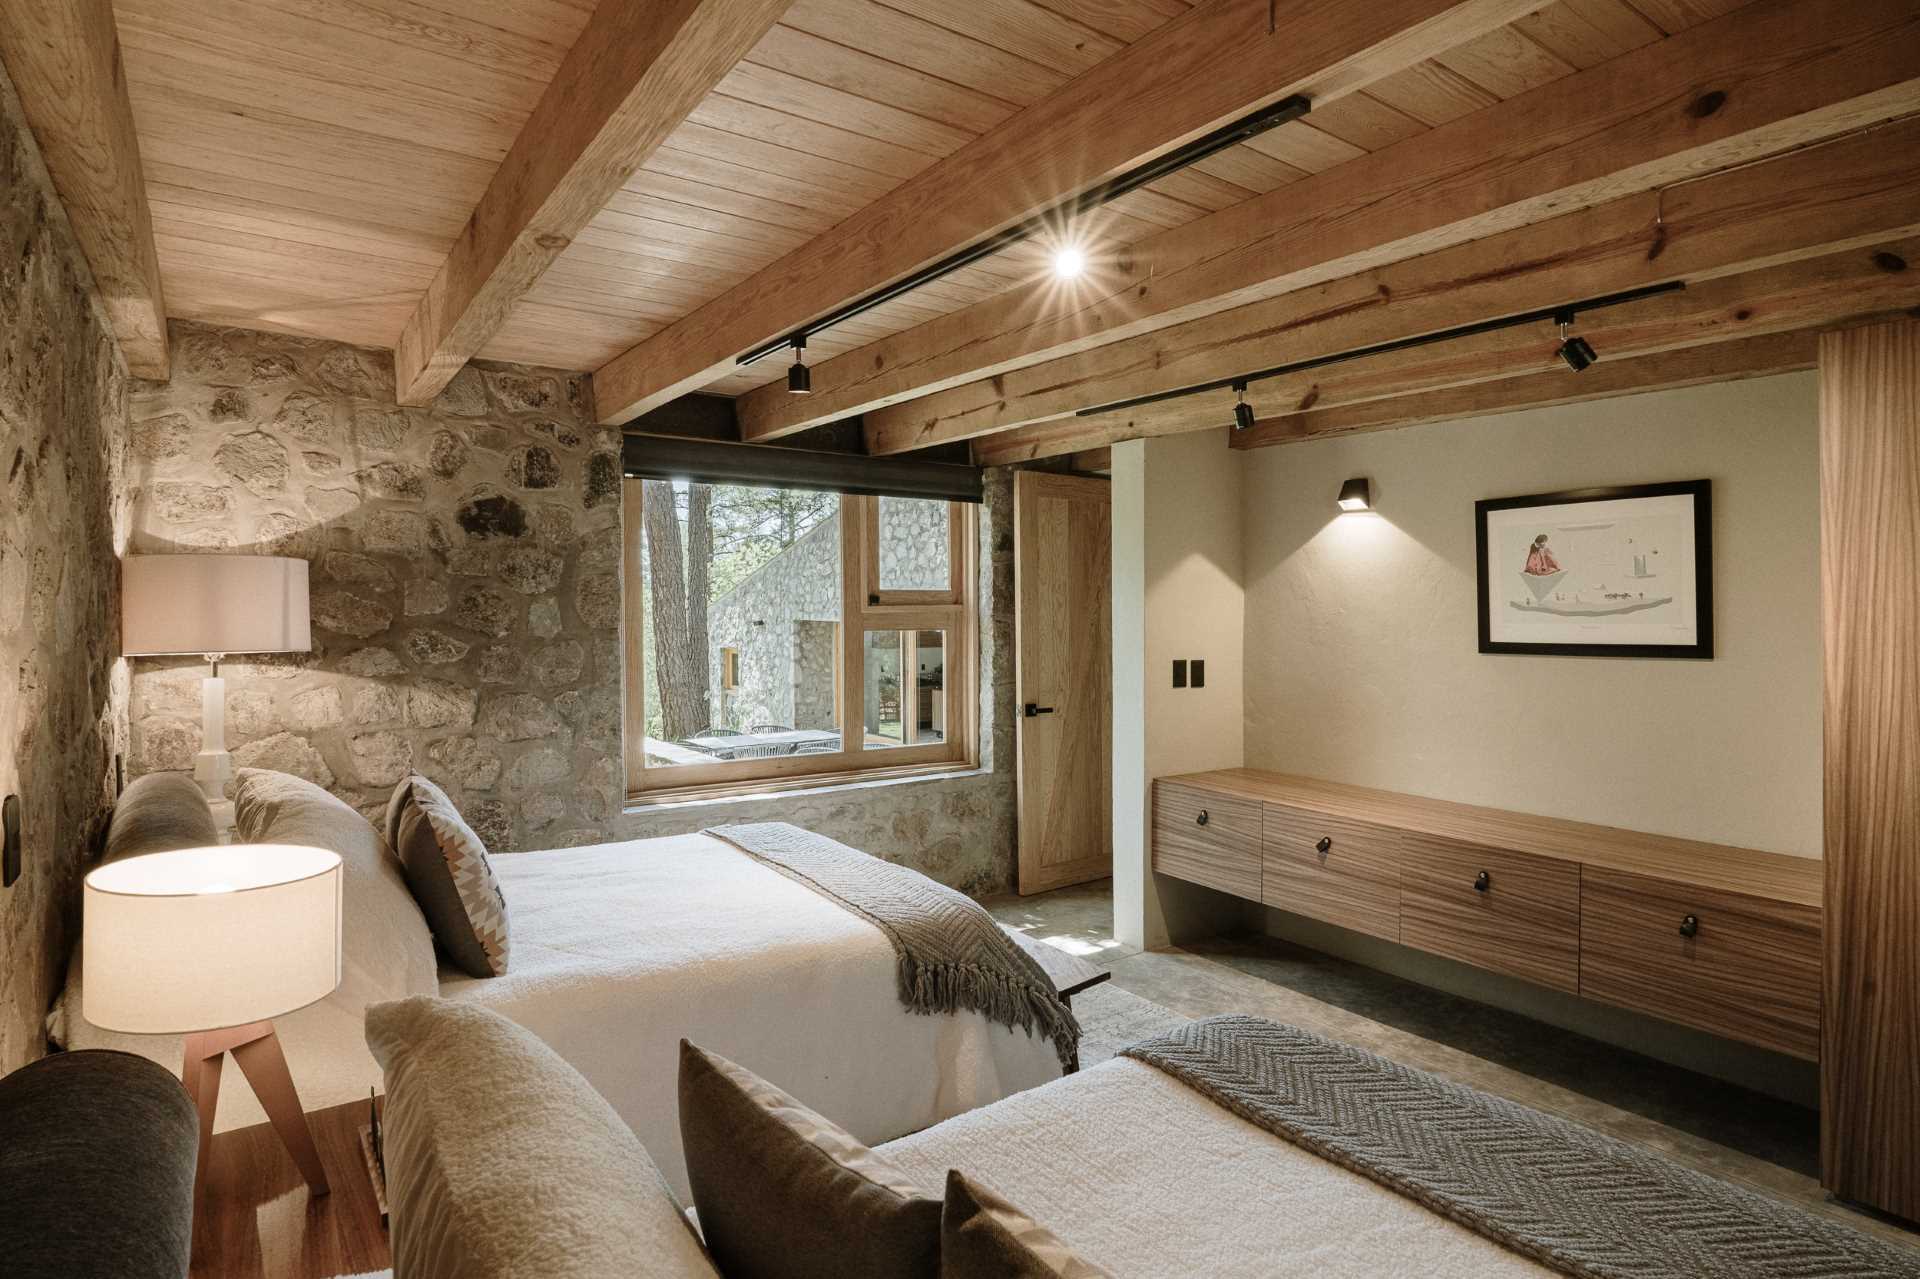 A modern stone and wood bedroom with two beds and built-in cabinetry.